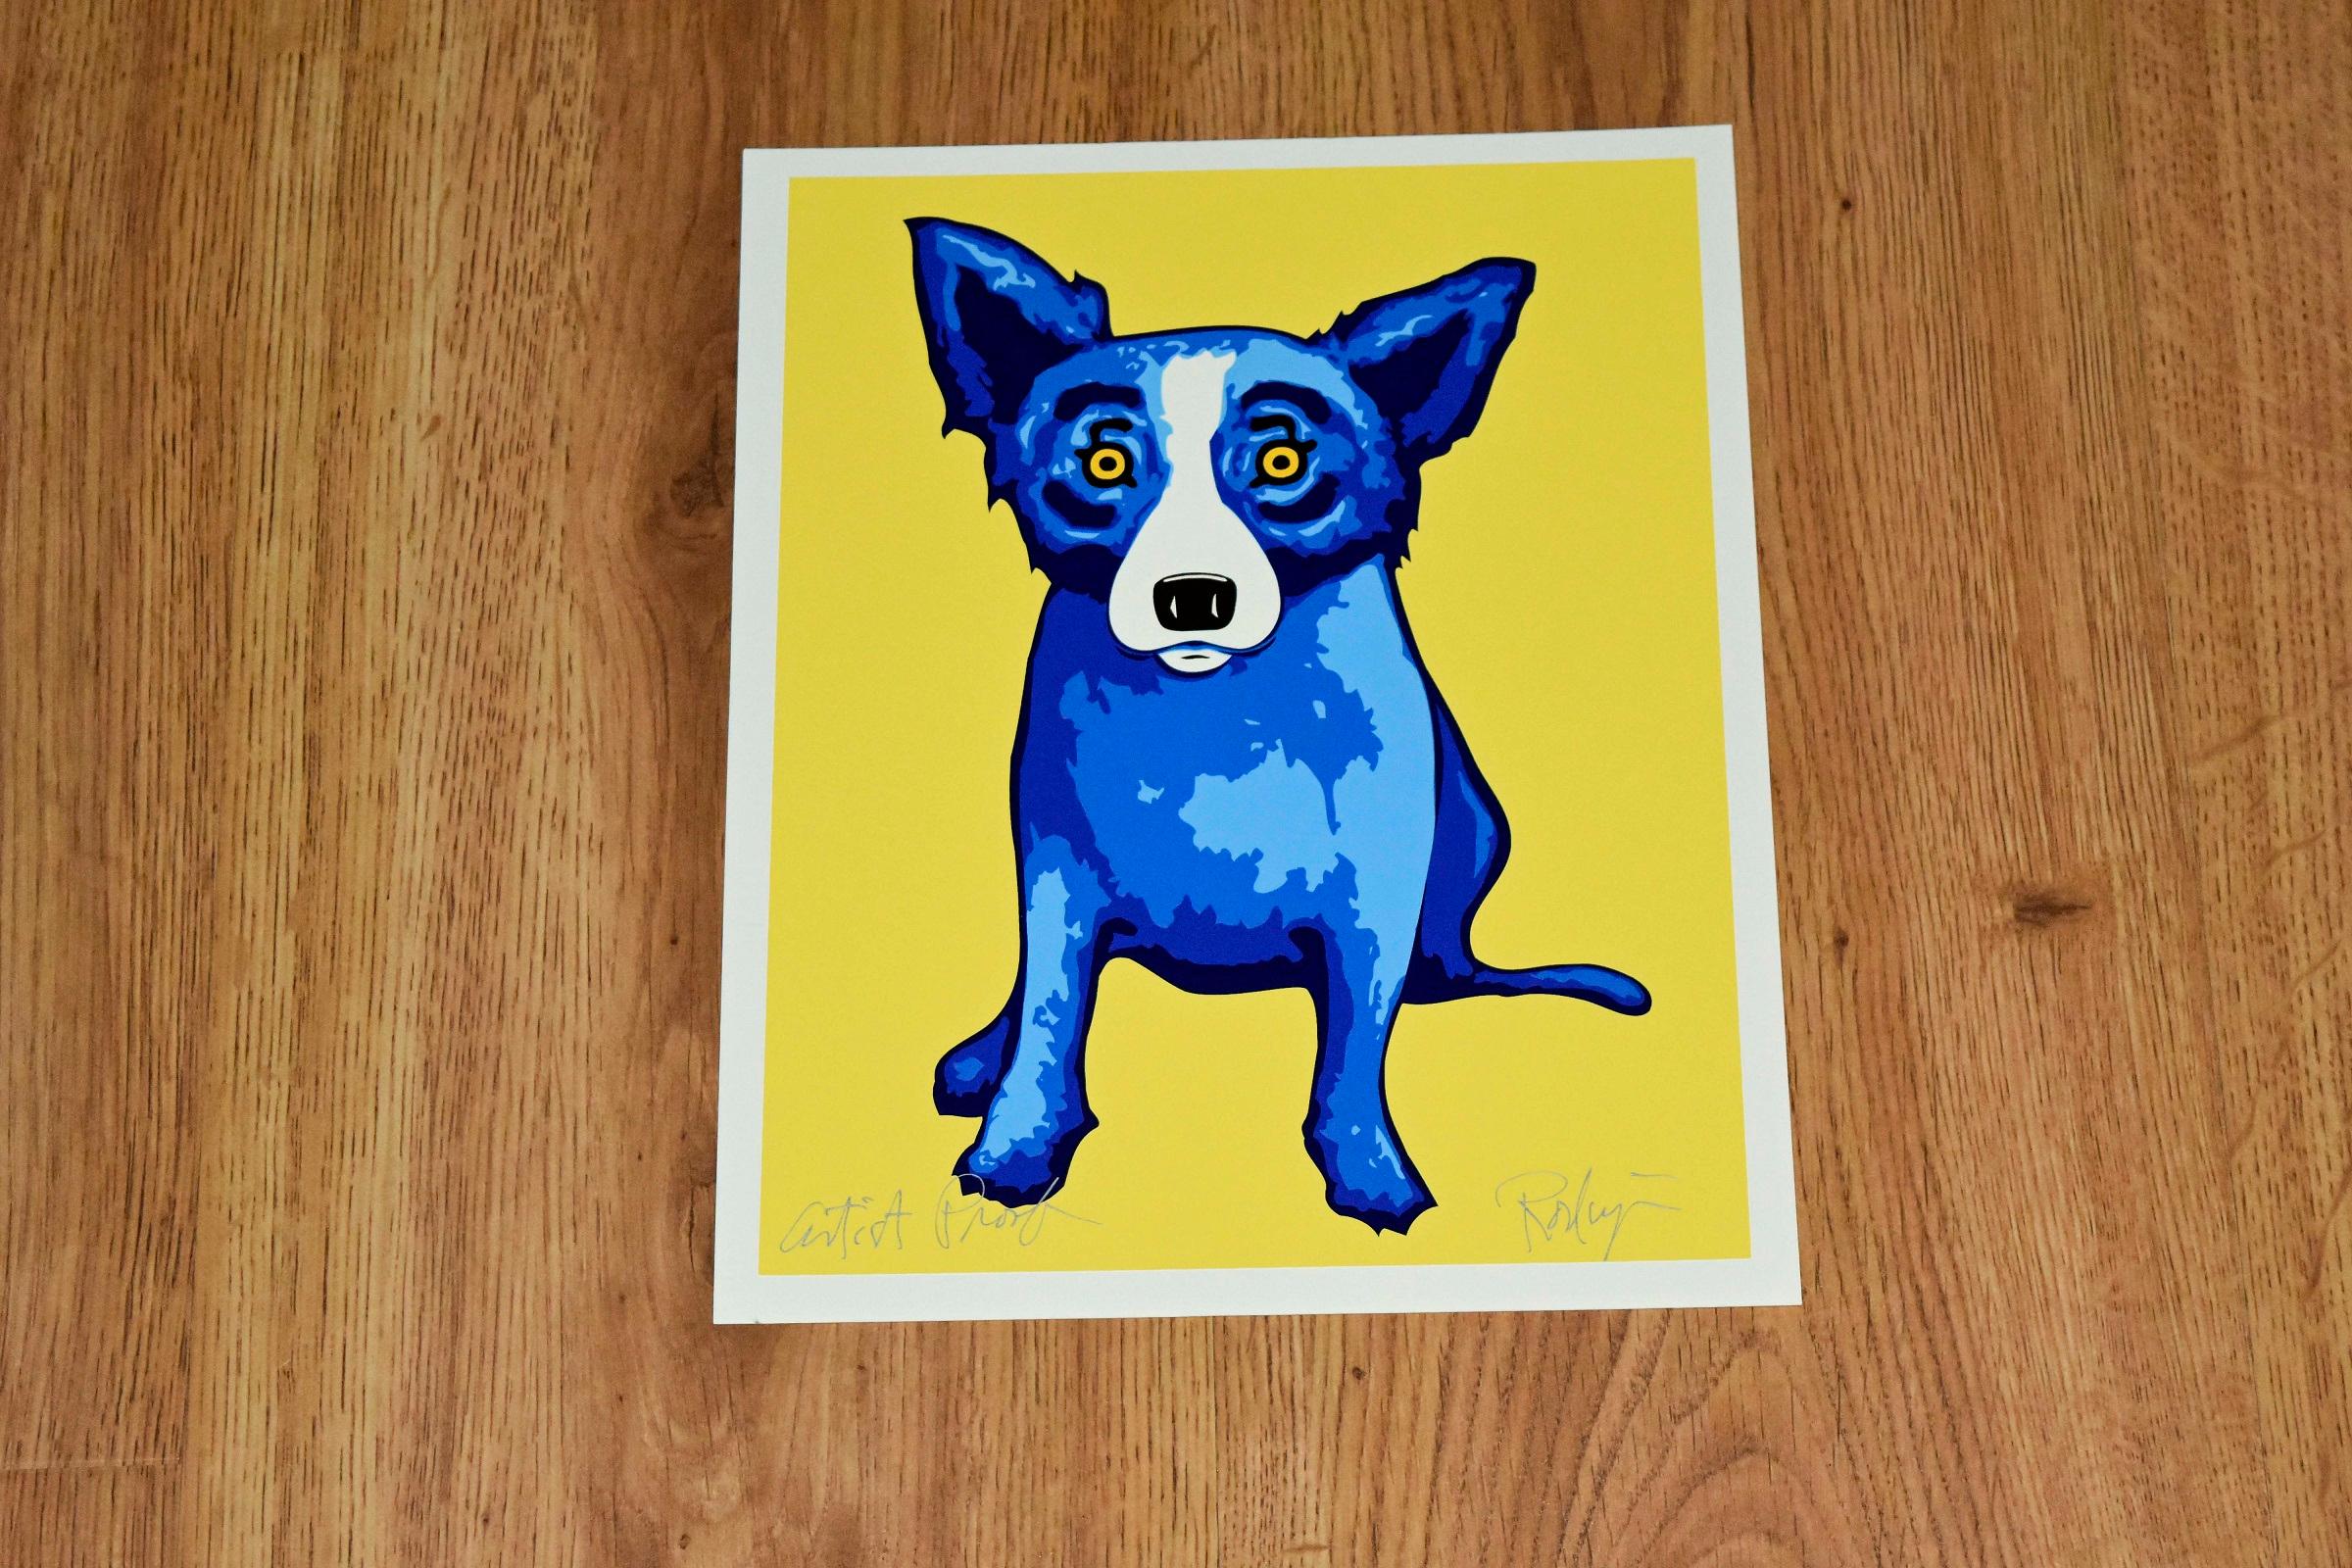 Sunshine On My Shoulder - Signed Silkscreen Print - Yellow Animal Print by George Rodrigue